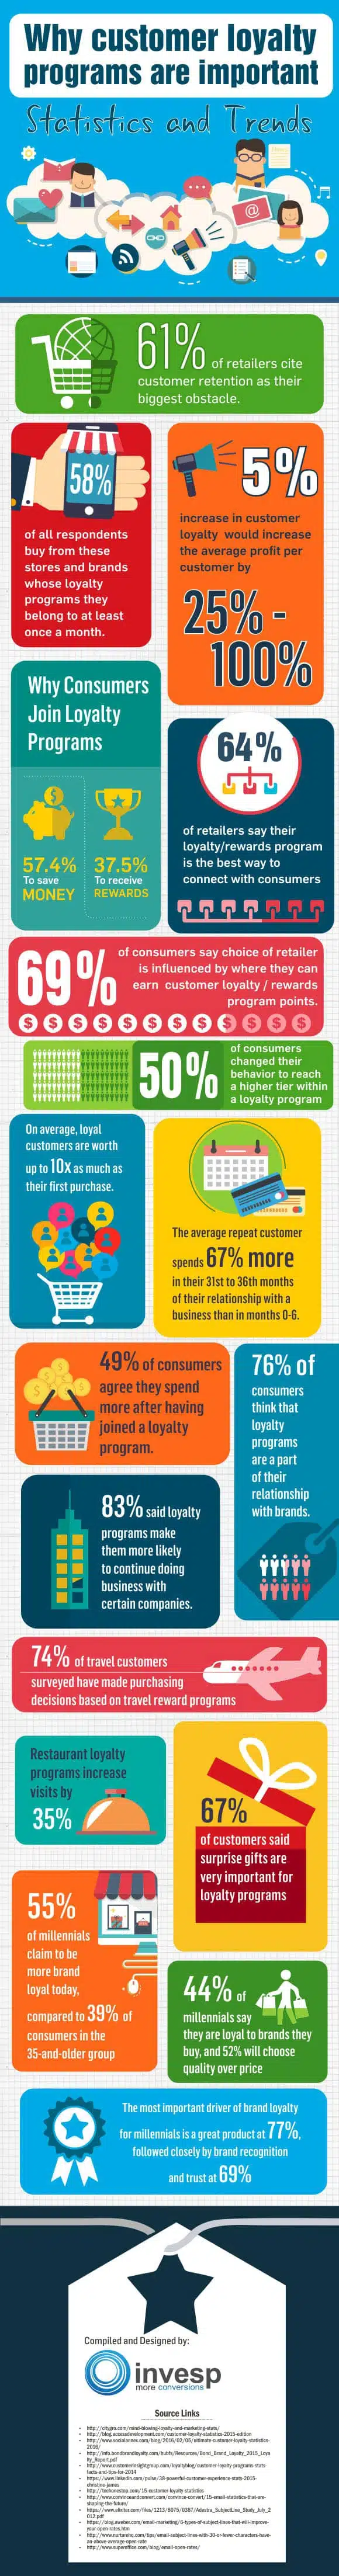 Why customer loyalty programs are important